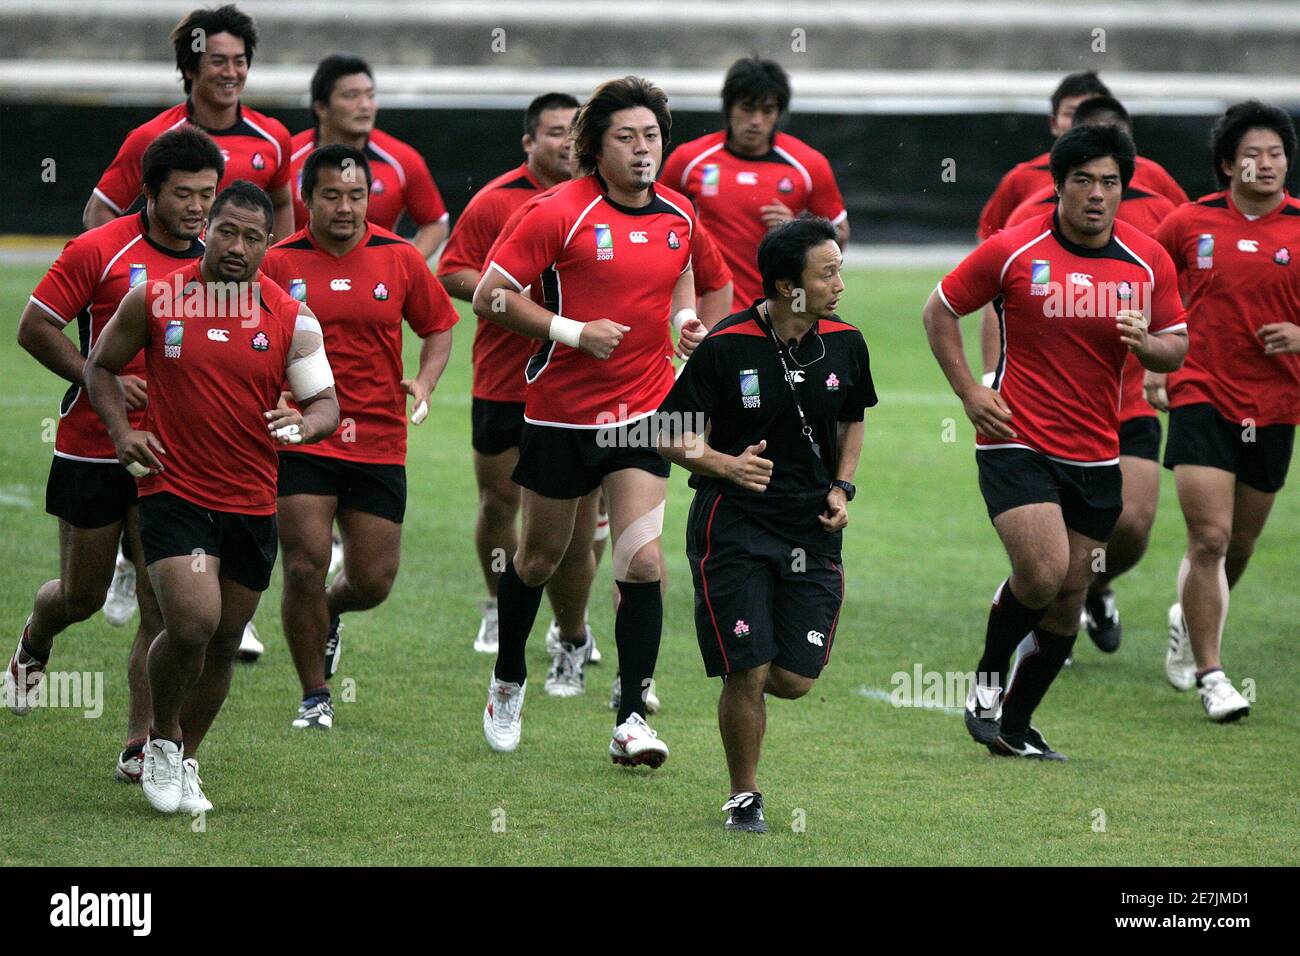 Japan rugby team players run during a training session under the rain at stadium Michel Bendichou in Colomiers, southwestern France, September 17, 2007. Japan plays in Pool B with Australia, Wales, Fiji and Canada in the Rugby World Cup 2007 REUTERS/Jean-Philippe Arles (FRANCE) Stock Photo